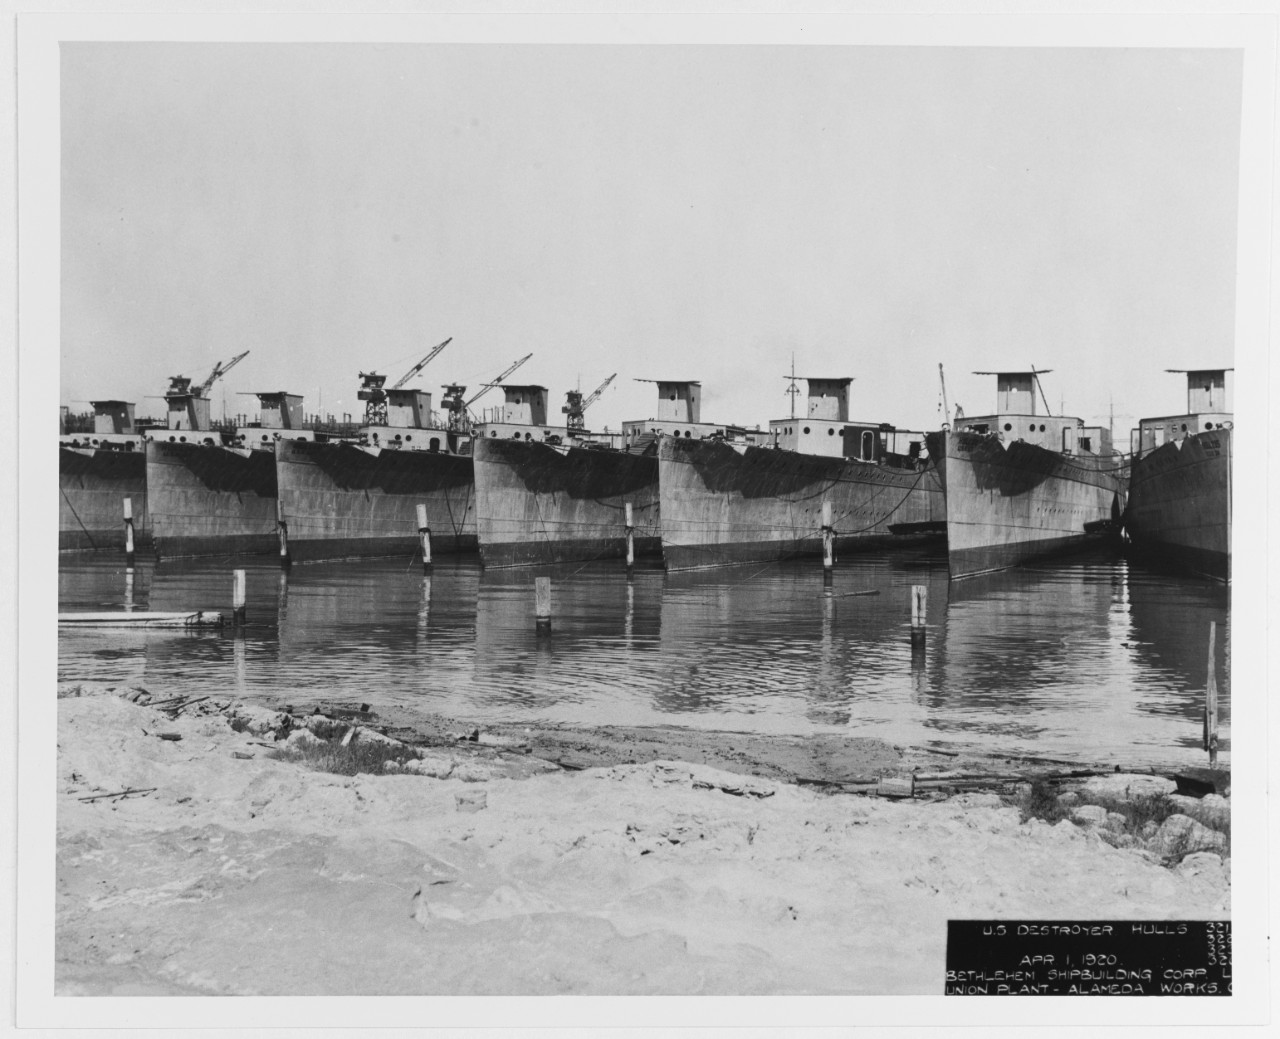 Photo #: 19-LC-38-L-3  U.S. Navy destroyers fitting out